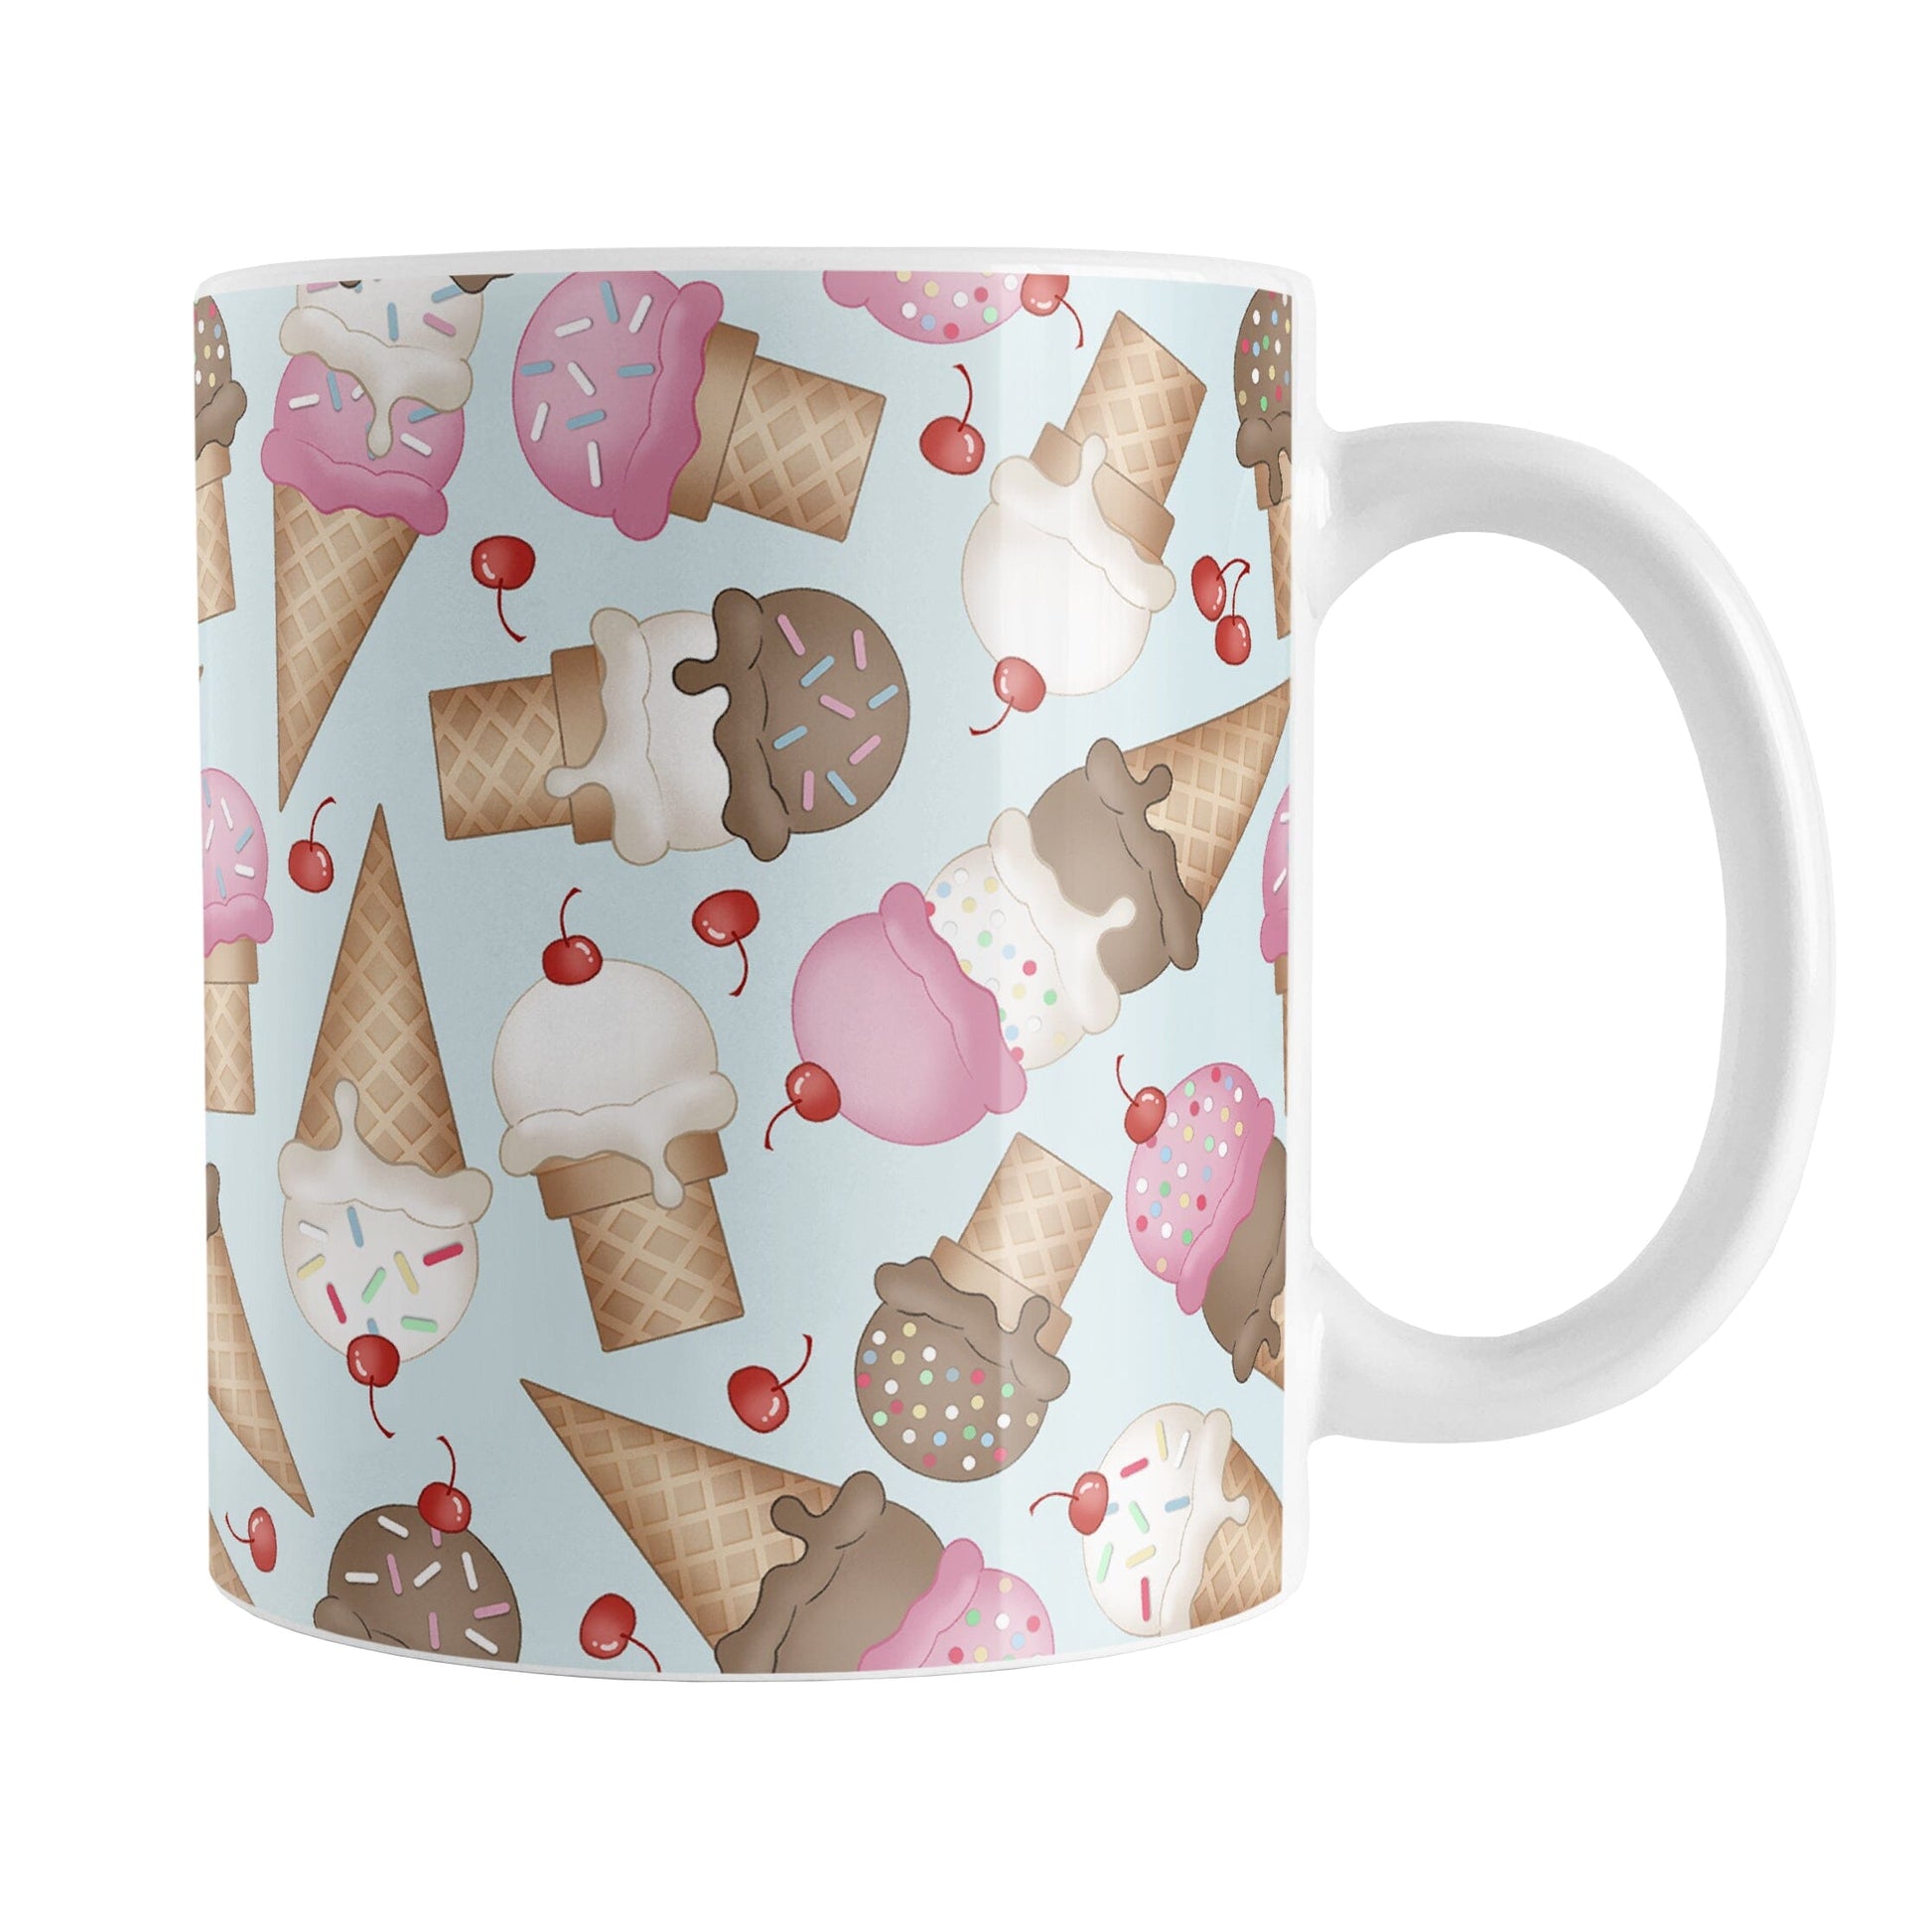 Ice Cream Cones Pattern Mug (11oz) at Amy's Coffee Mugs. A ceramic coffee mug printed with a design of hand-drawn ice cream cones with chocolate, strawberry, and vanilla scoops, with sprinkles and cherries, over a pale blue color, in a pattern that wraps around the mug to the handle.